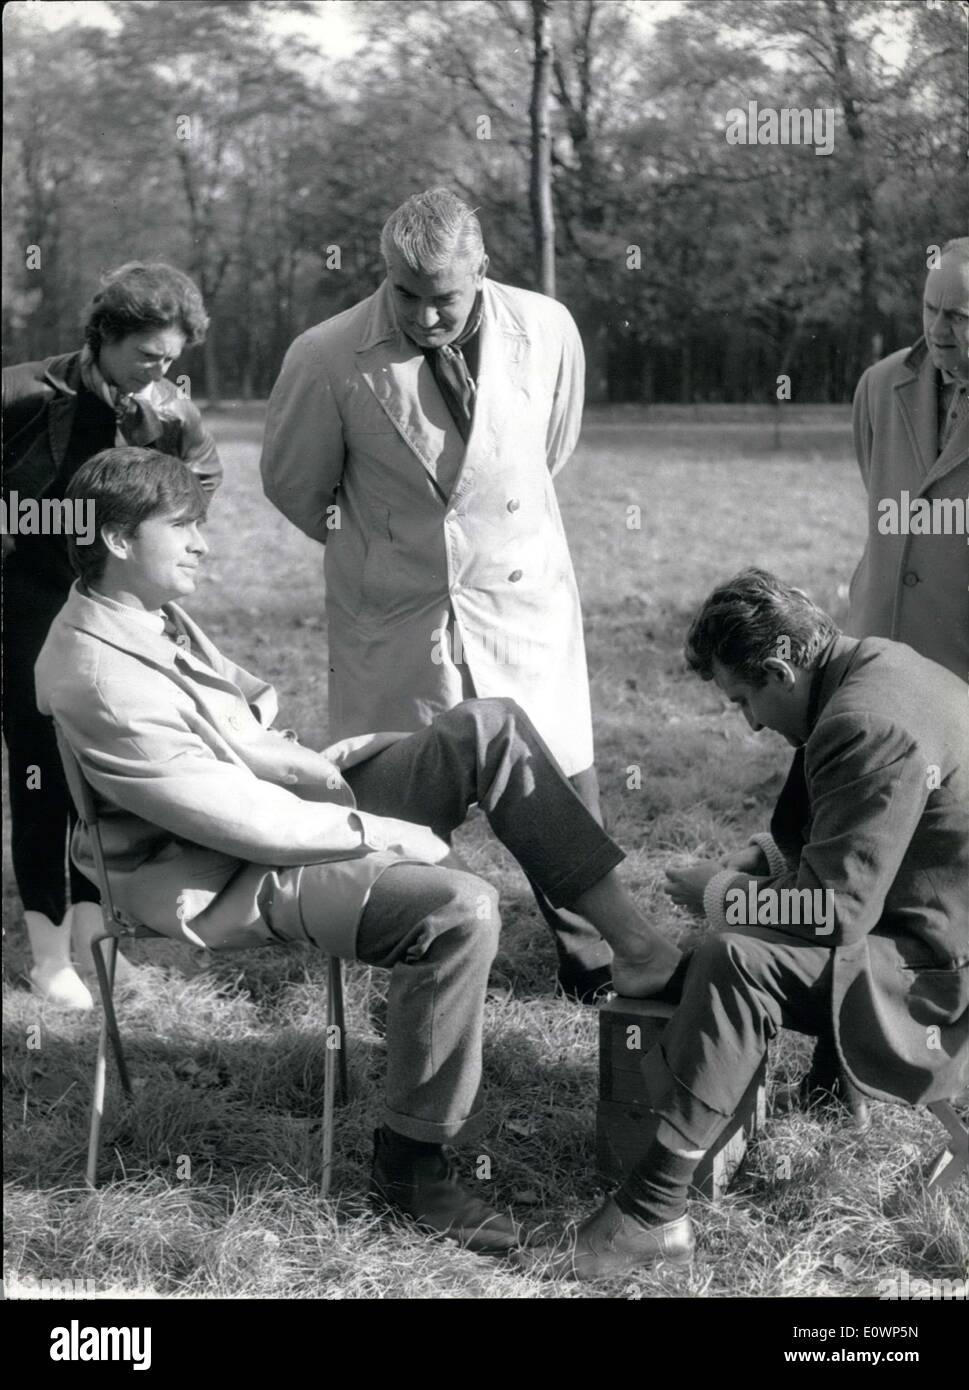 Nov. 03, 1963 - He sprained his ankle while filming ''A Ravishing Idiot'' in Saint Cloud Park. Ardan is the movie's producer. Stock Photo